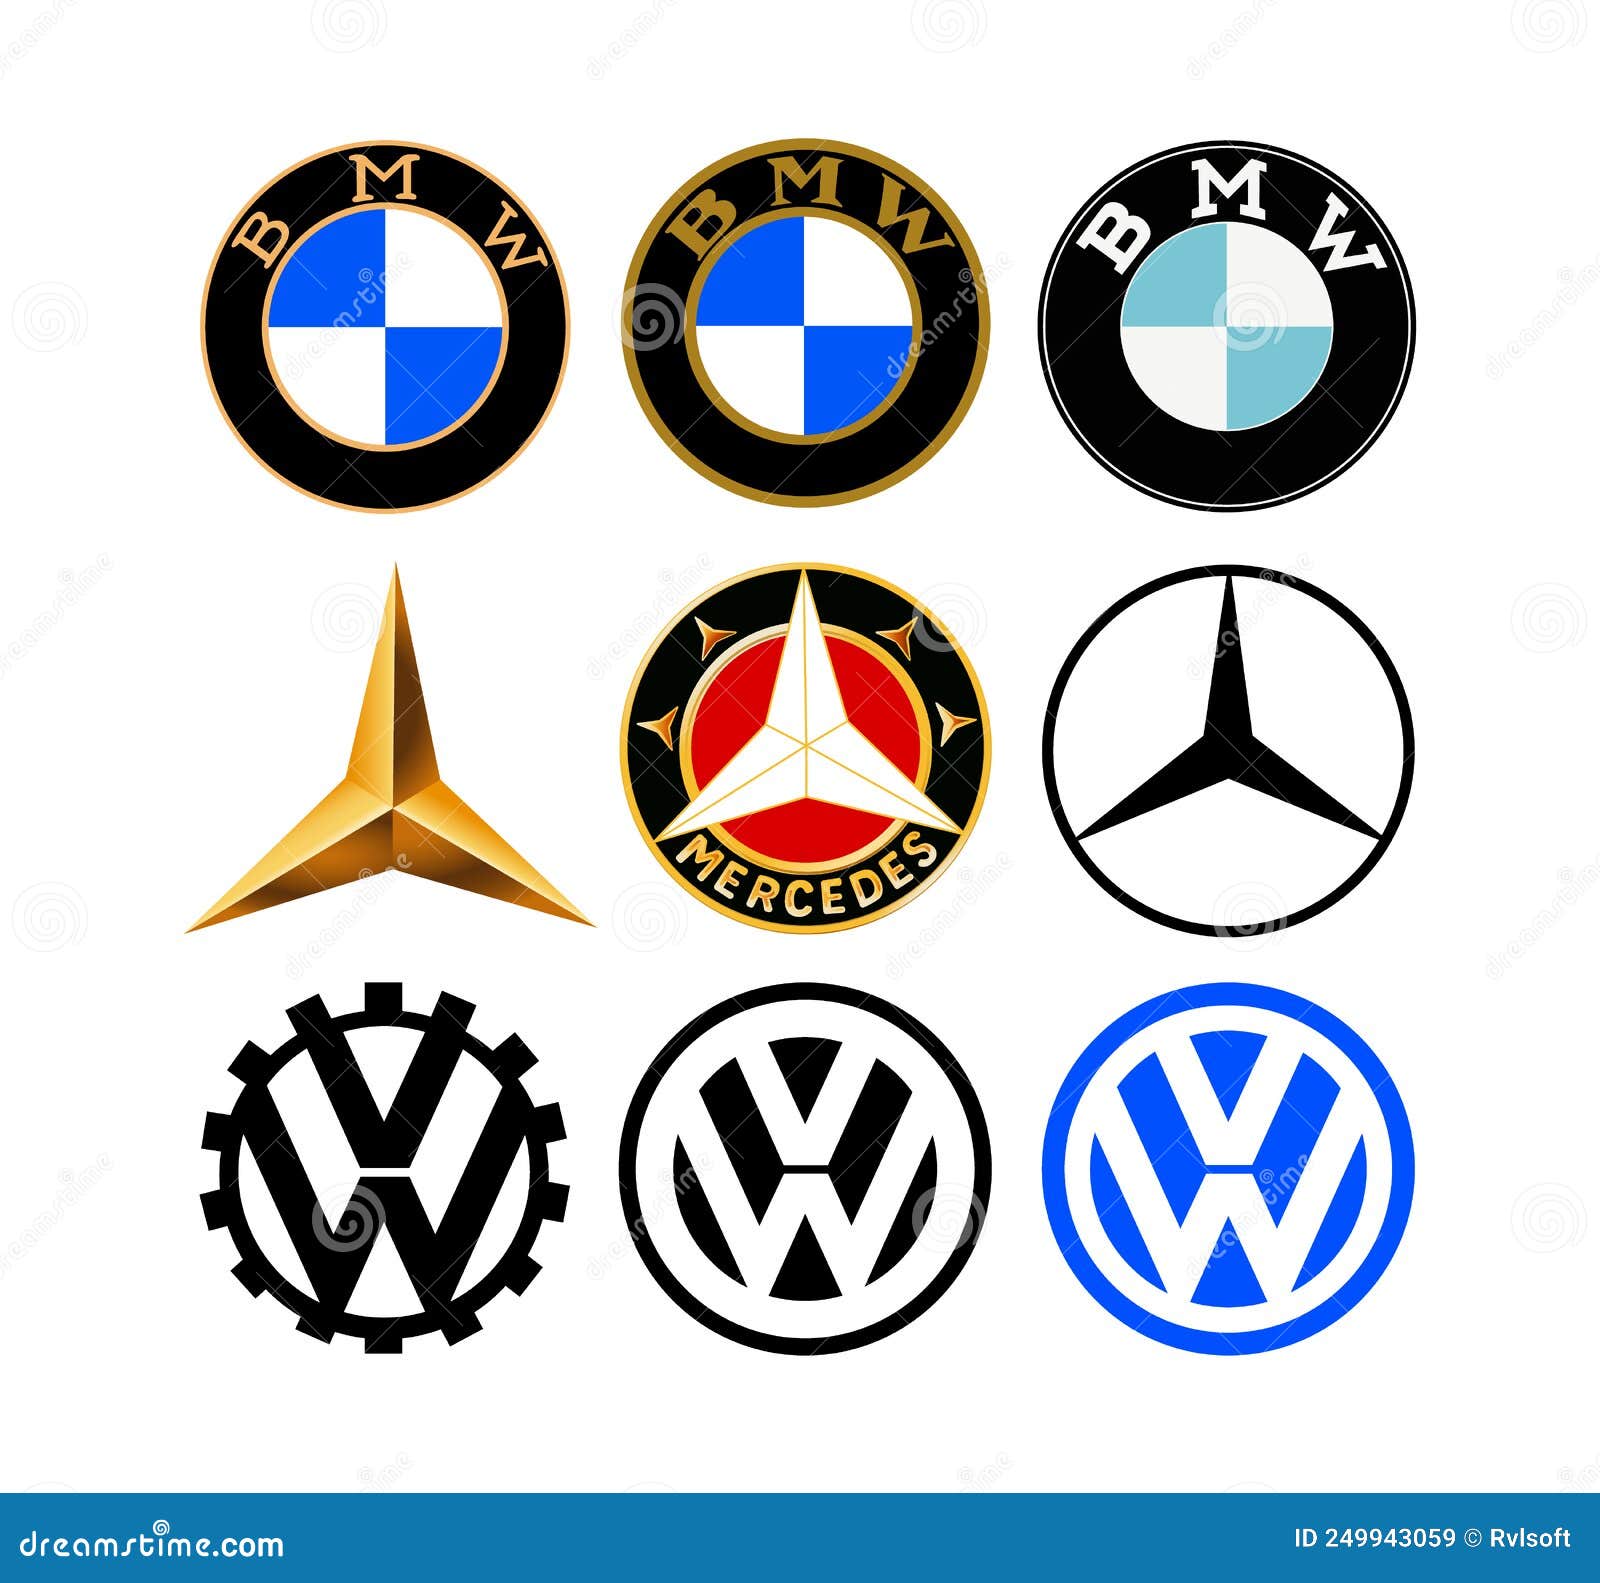 Vecteur Stock Collection of biggest European car manufacturers logos, on  white background: Renault, Mercedes Benz and Volkswagen, vector  illustration